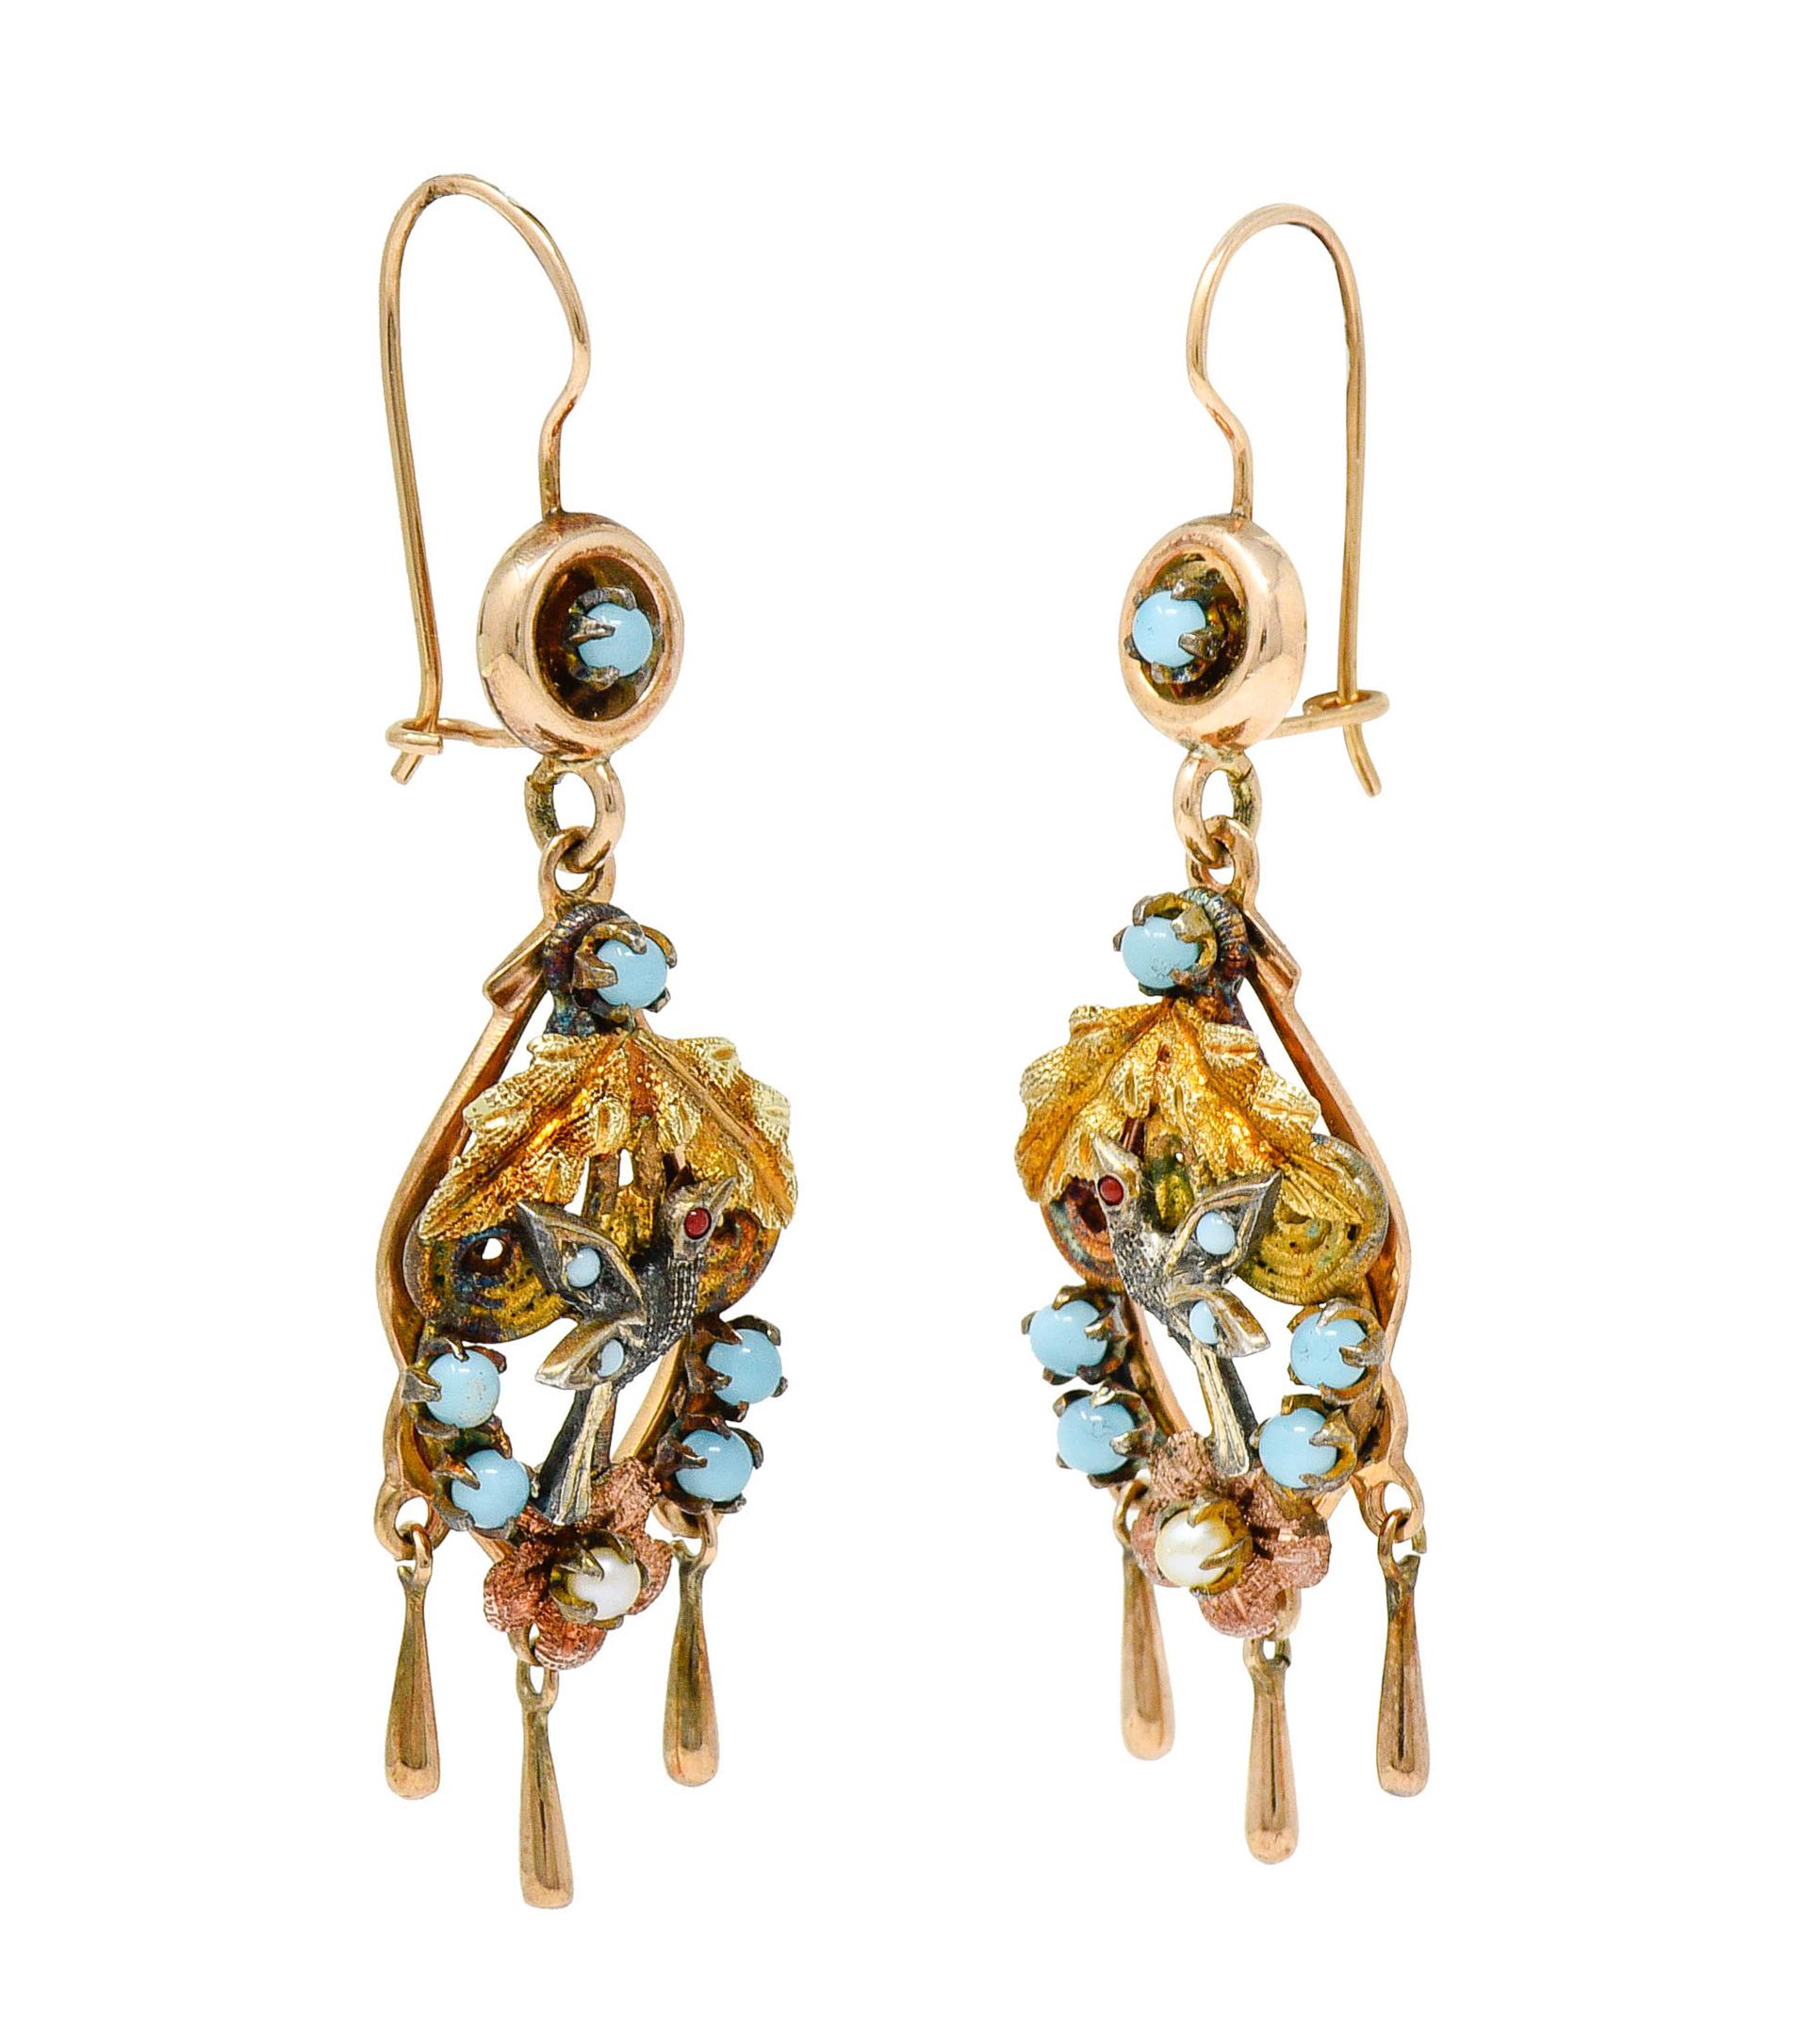 Earrings are designed with a puffed rose gold circular surmount suspending an ornate drop

Depicting a white gold hummingbird with yellow gold leaves and rose gold florals

Featuring translucent and round pastel blue glass cabochons throughout and